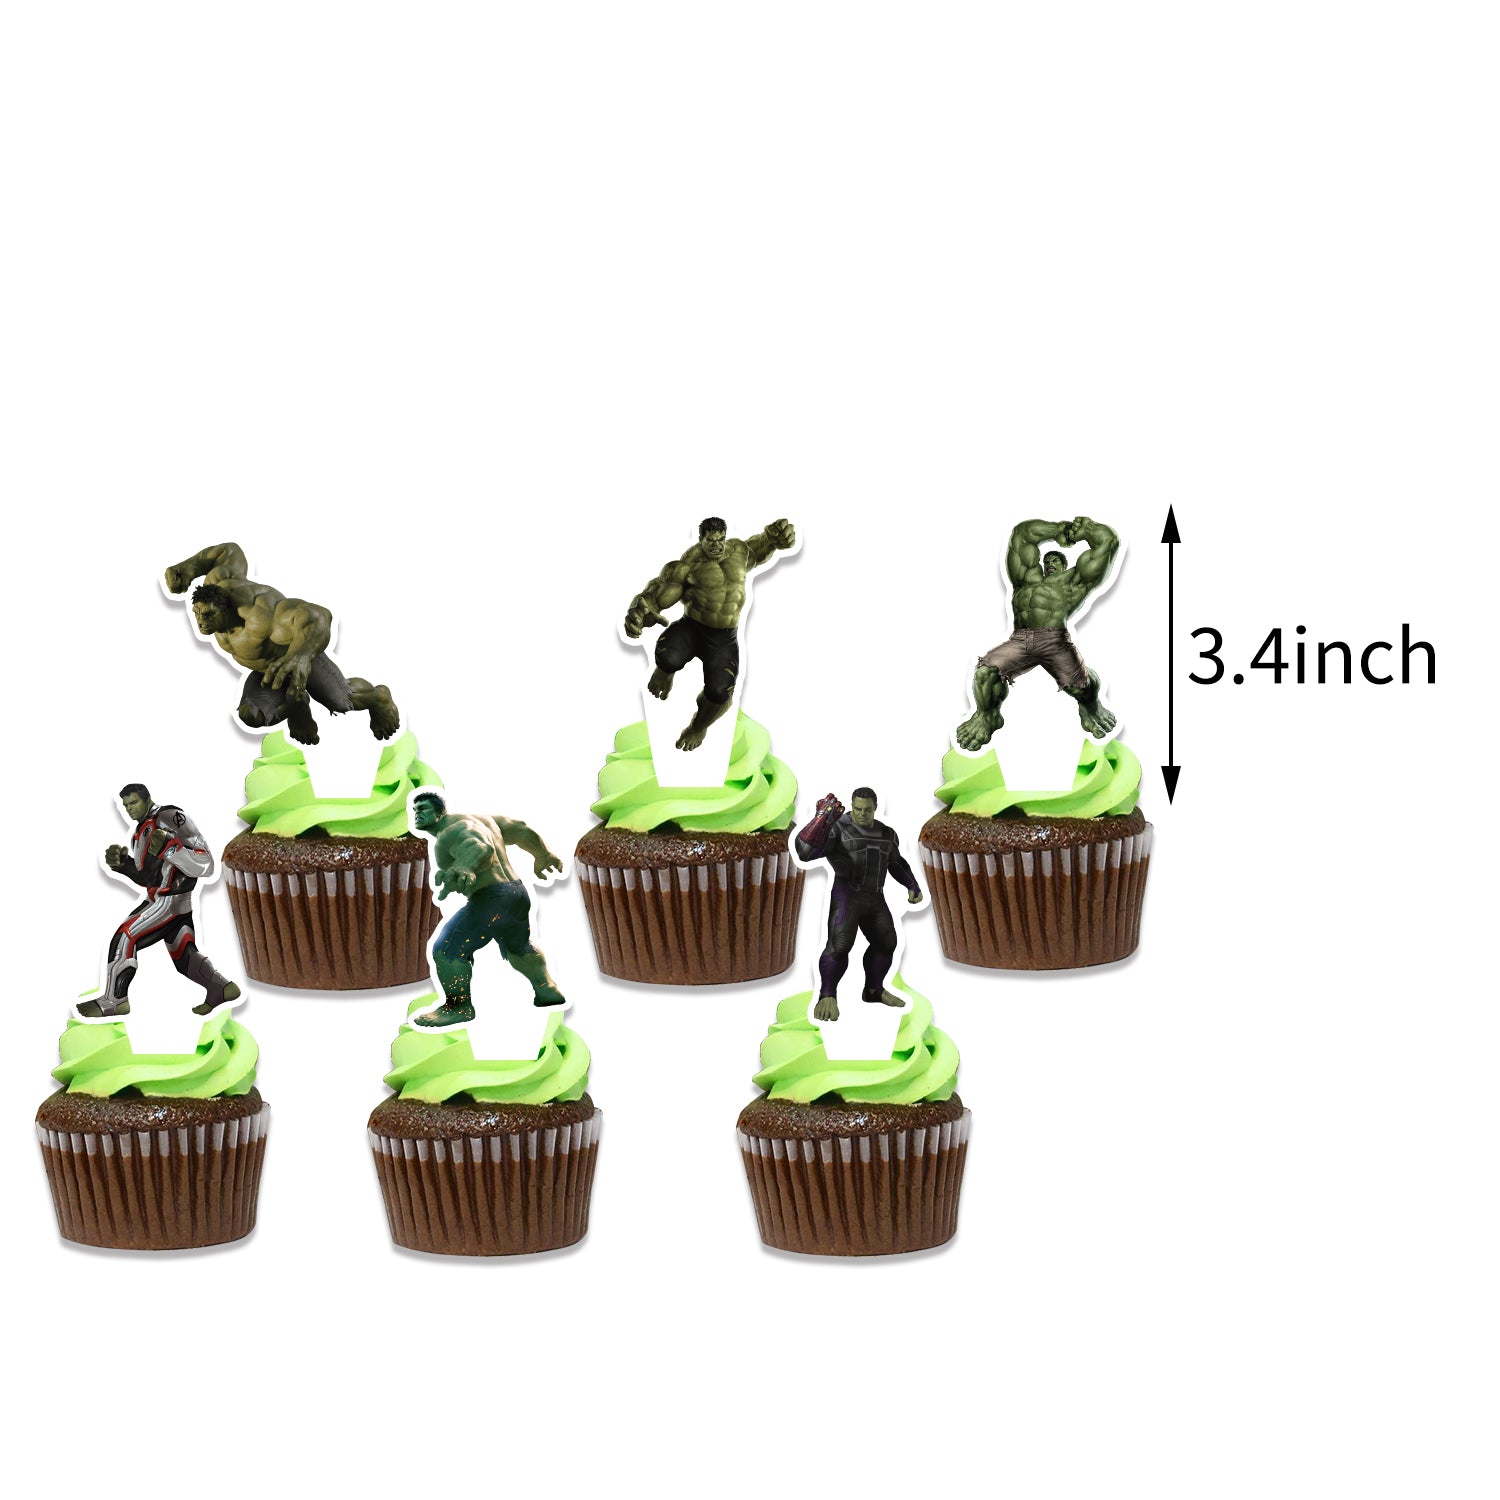 The Incredible Hulk Birthday Party Decorations - Party Corner - BM Trading